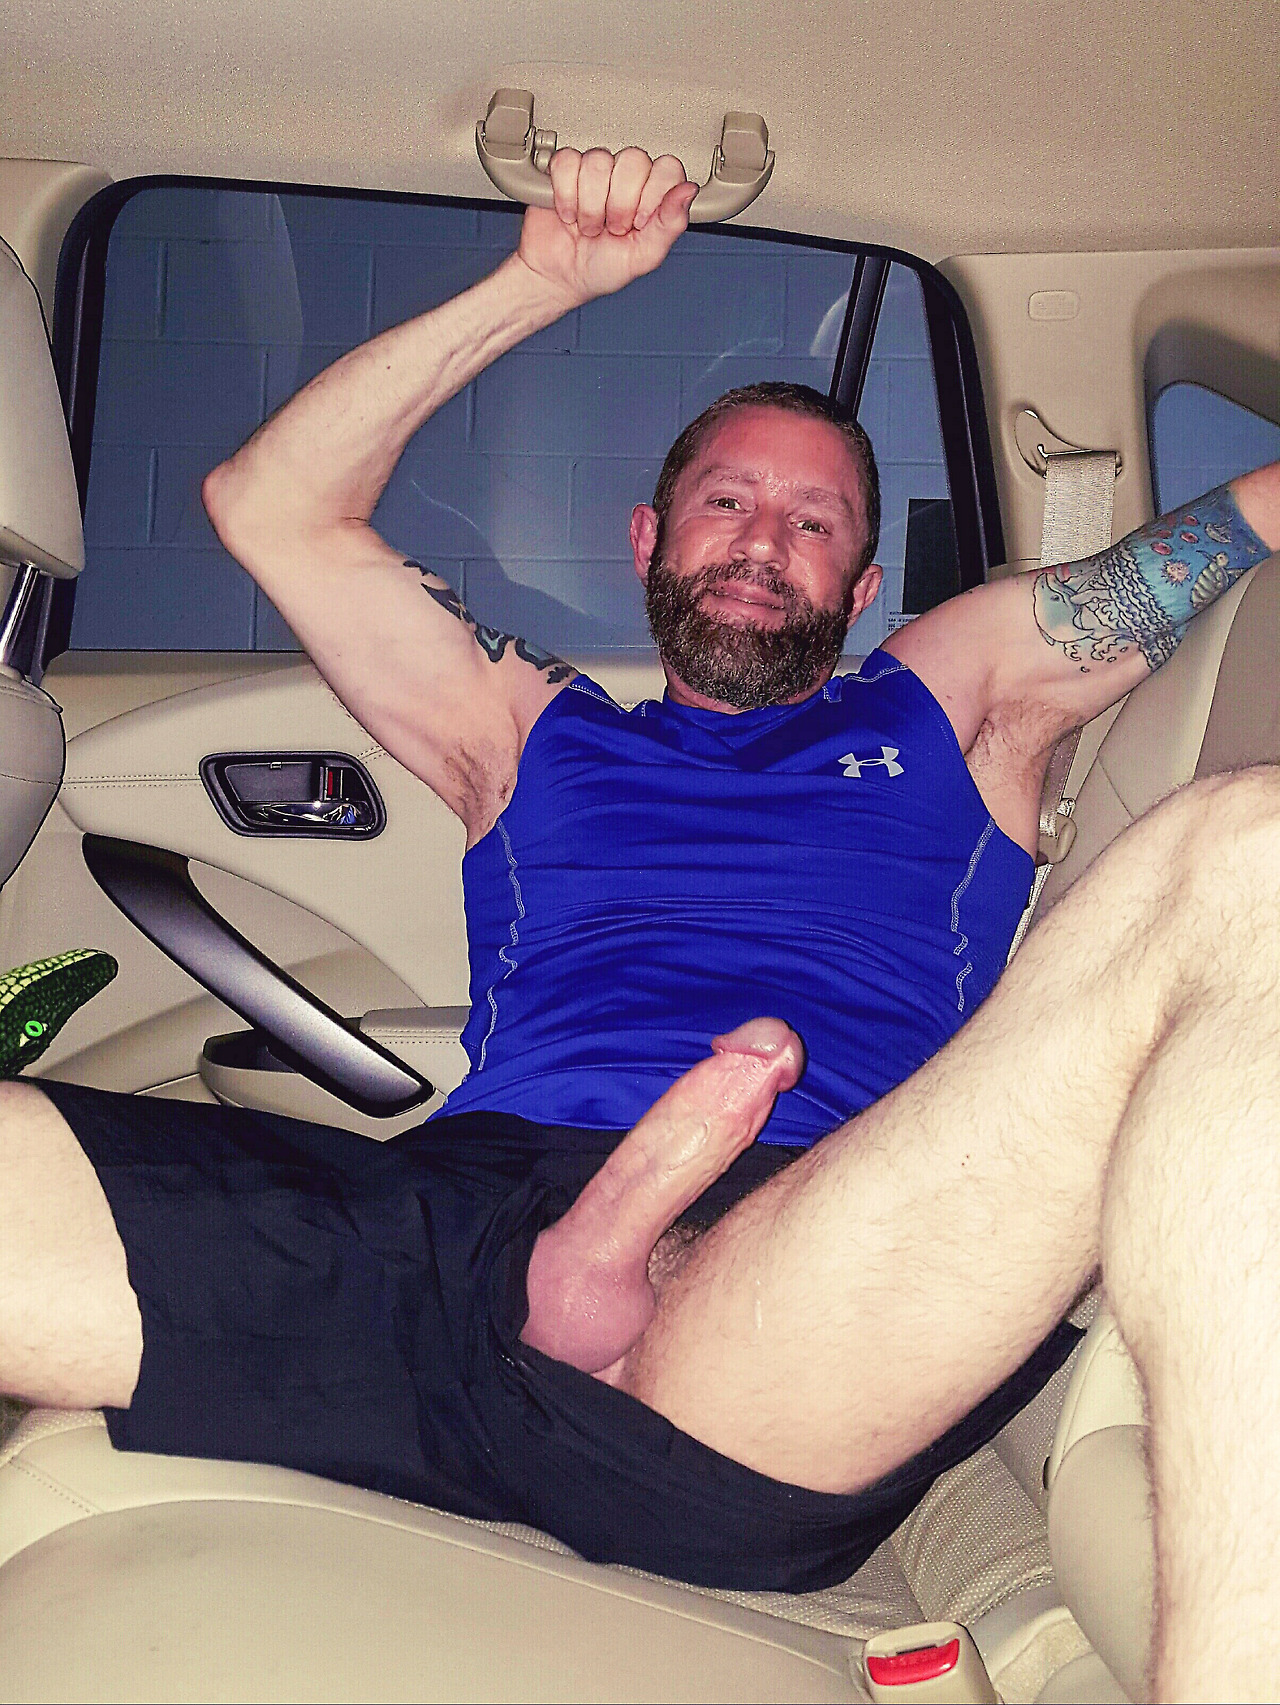 geckoguy62:  Playing around in the back seat of my SUV in the parking lot after the